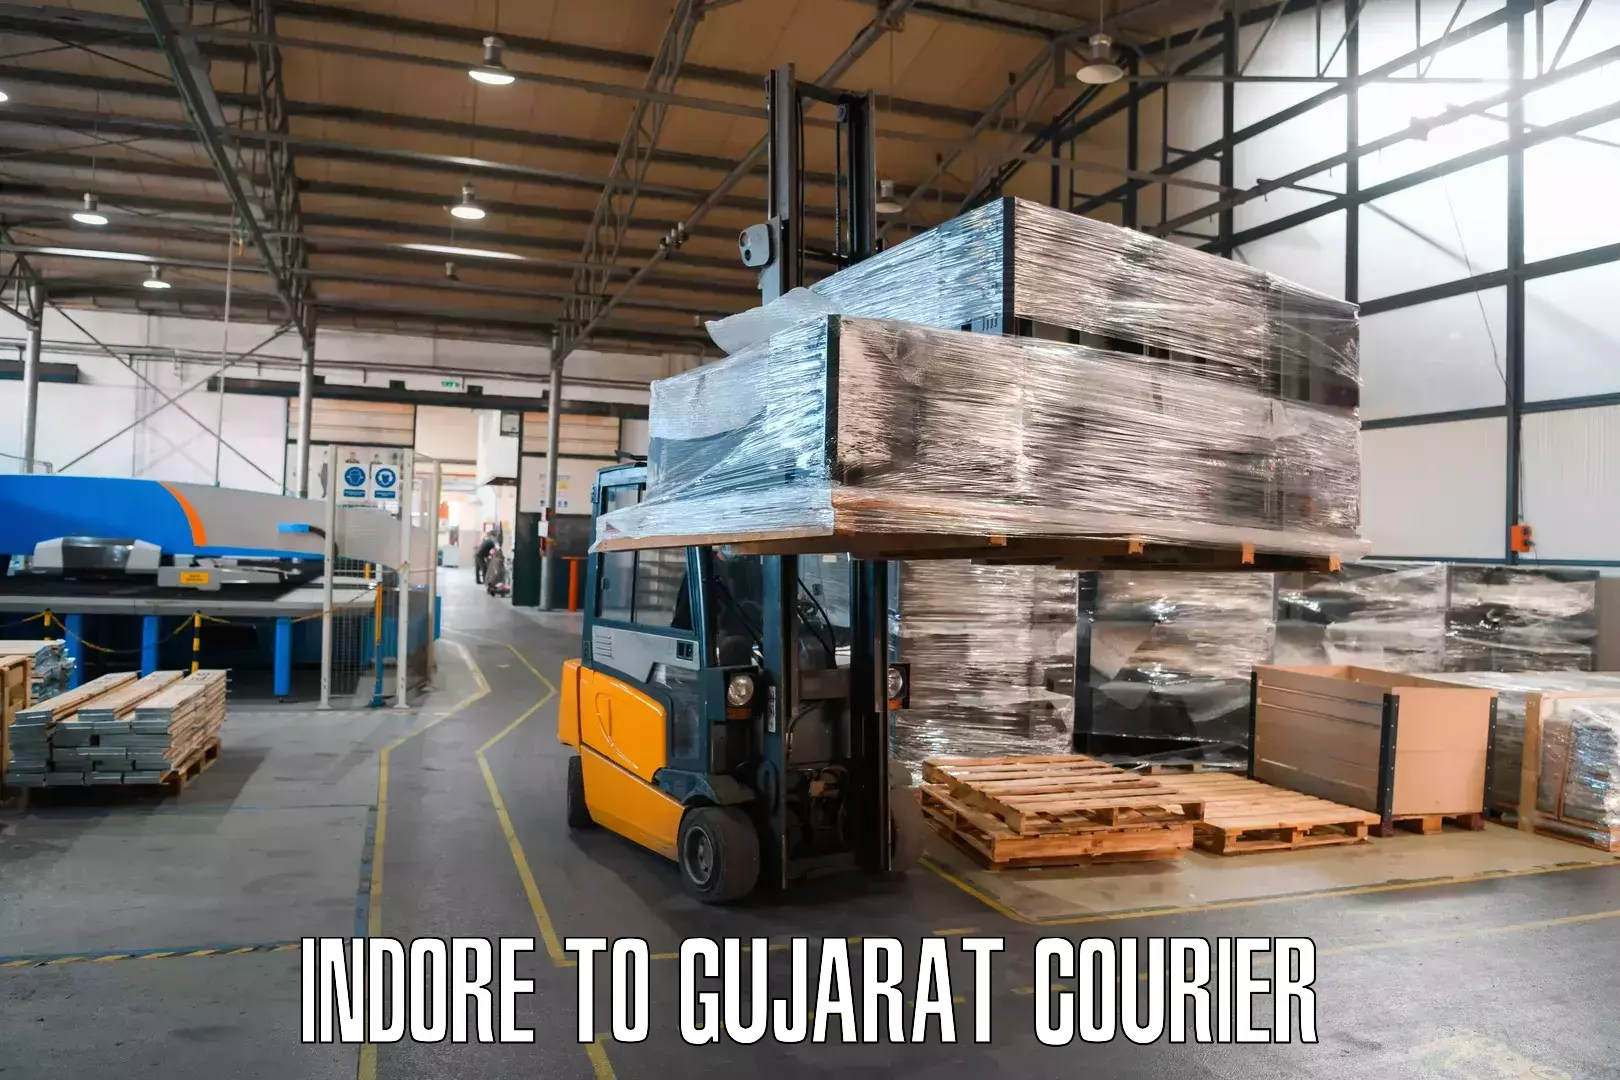 Courier service innovation Indore to Prantij